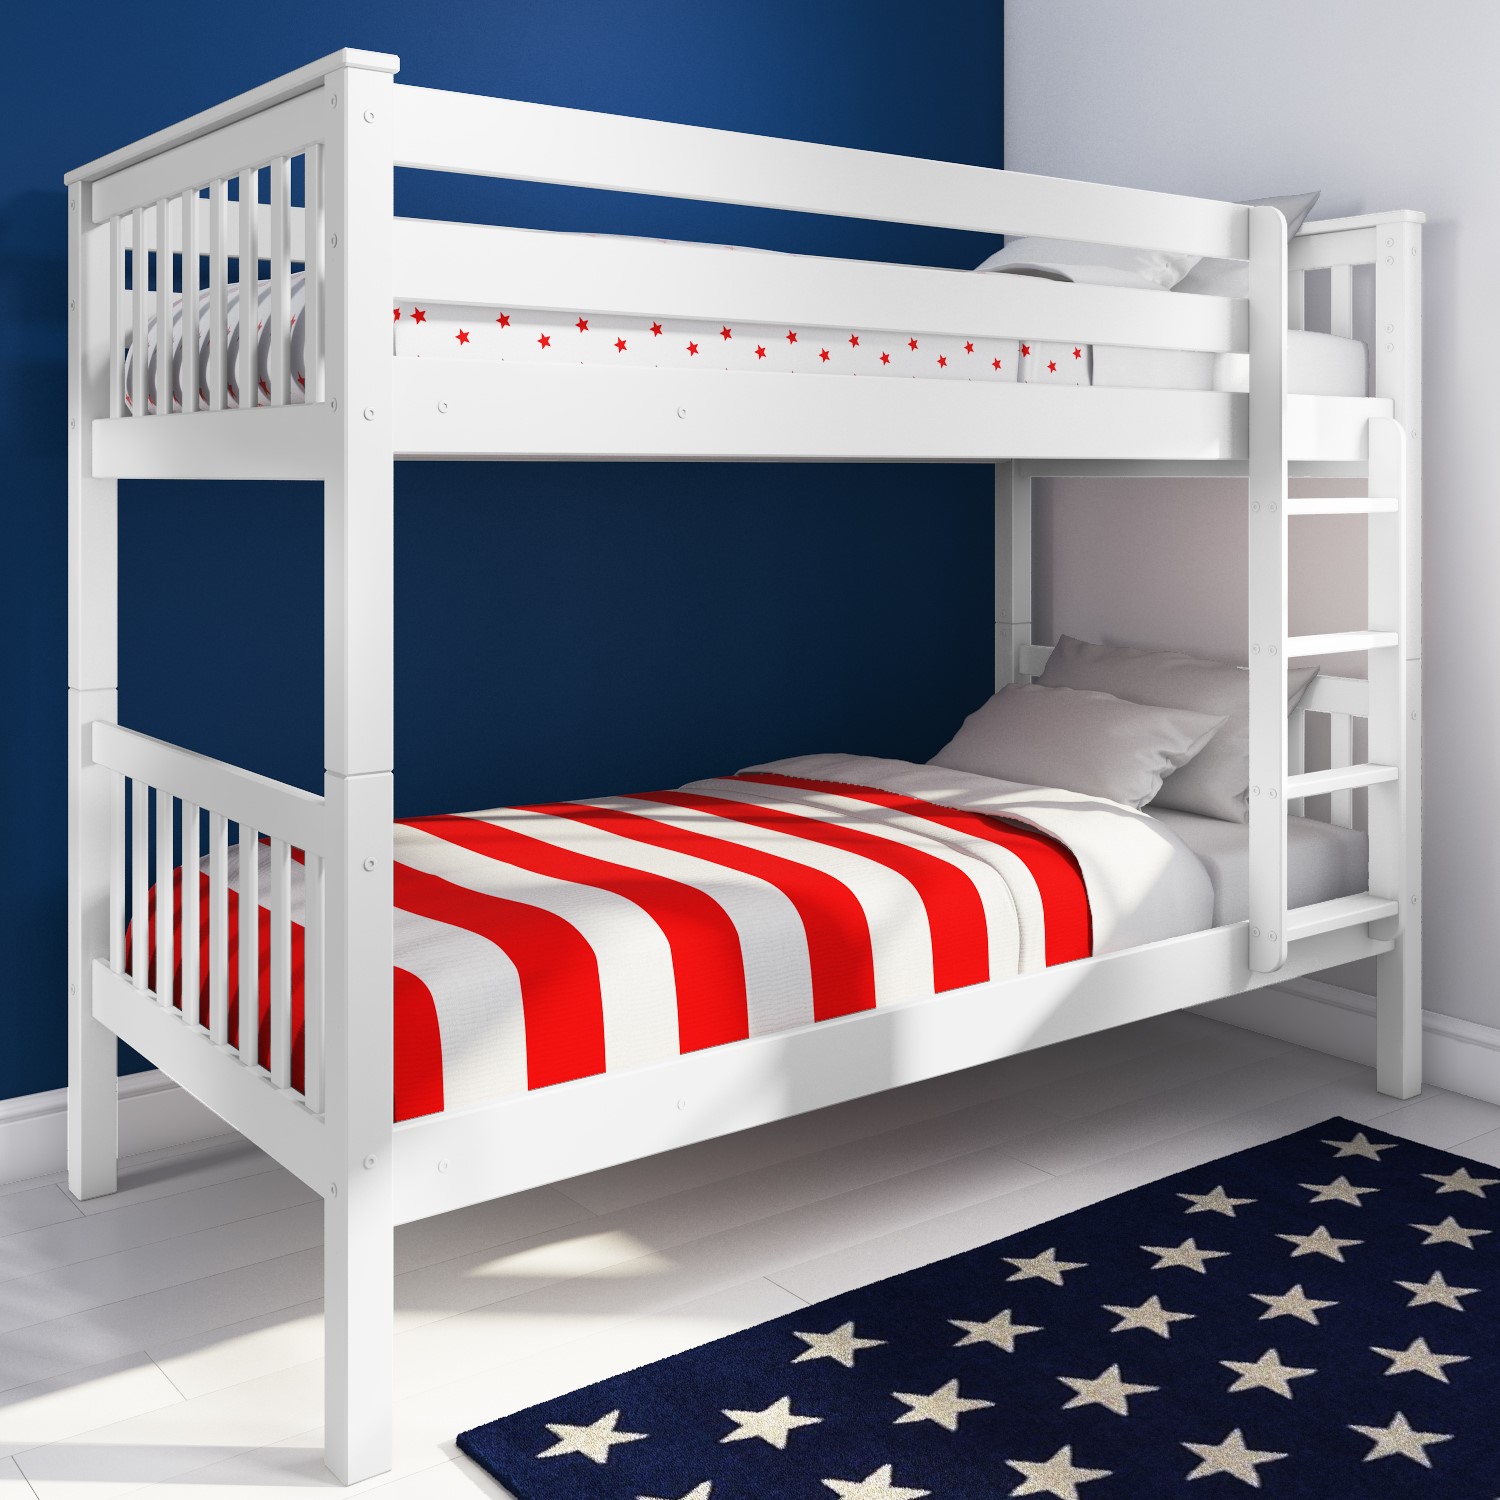 Oxford Single Bunk Bed In White, Bunk Beds That Separate Into Single